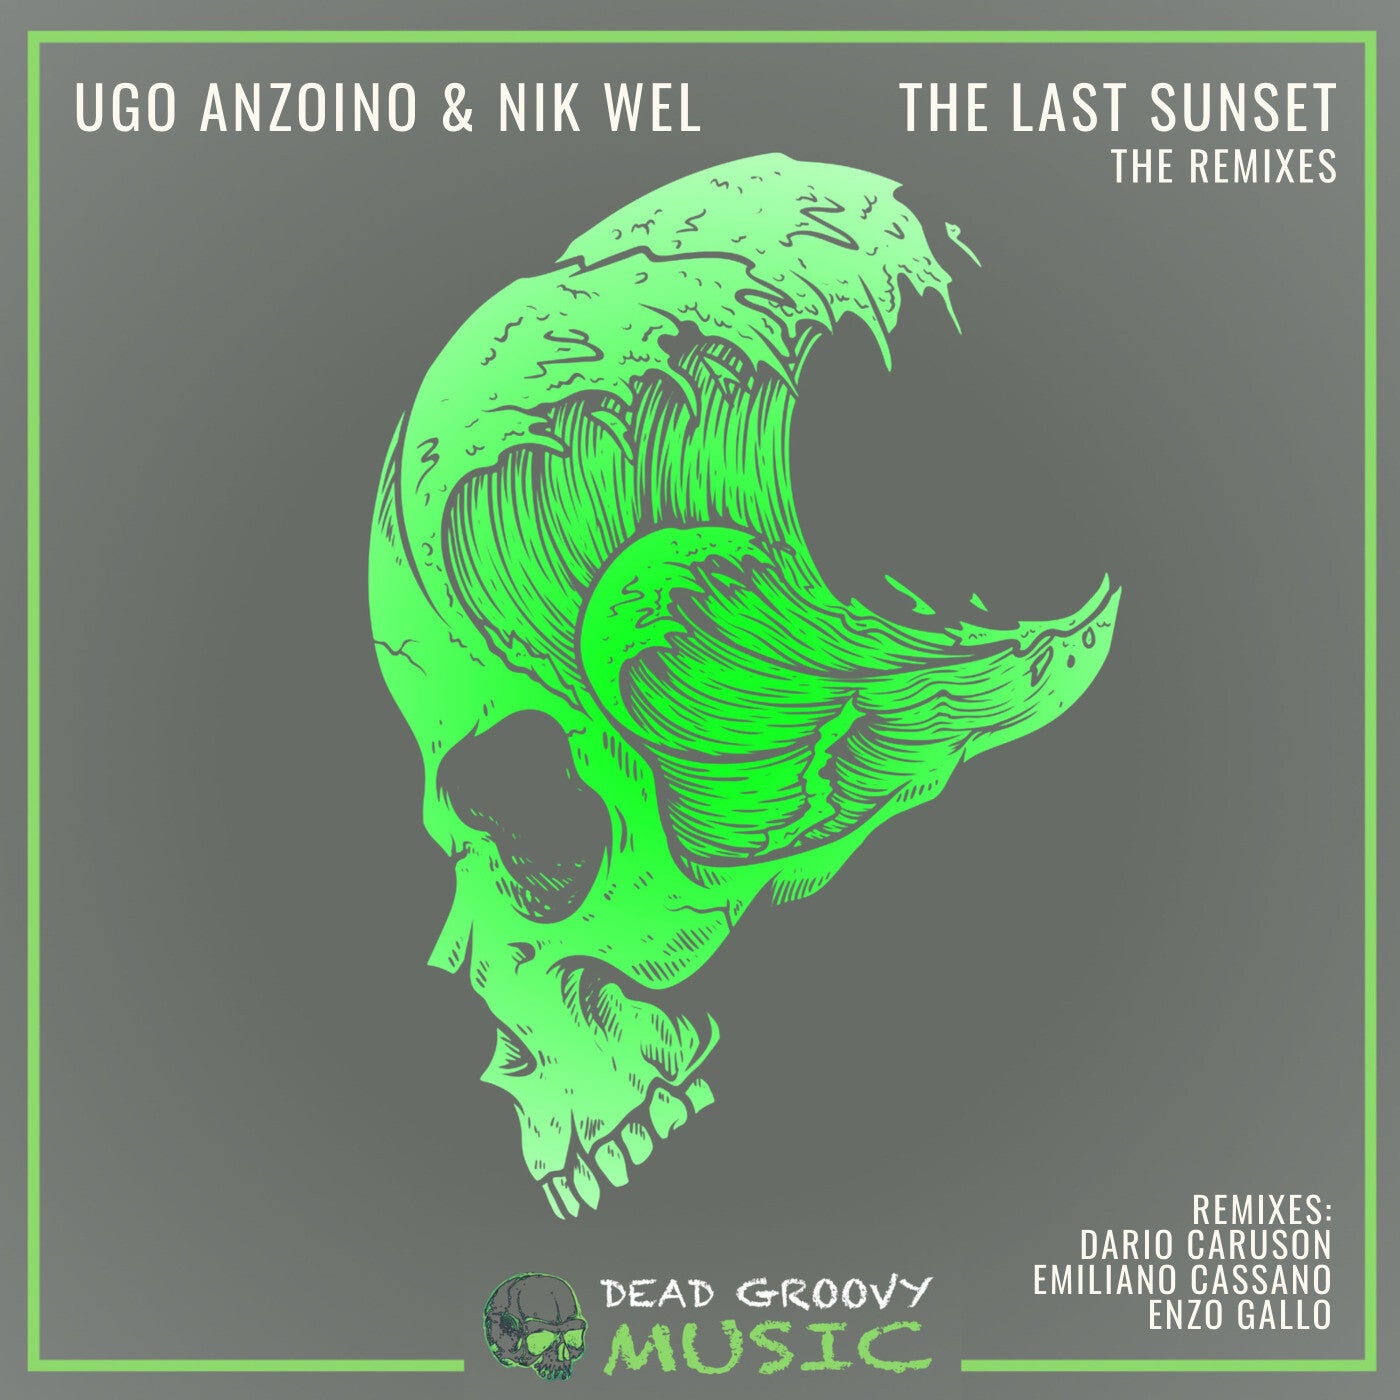 The Last Sunset - The Remixes